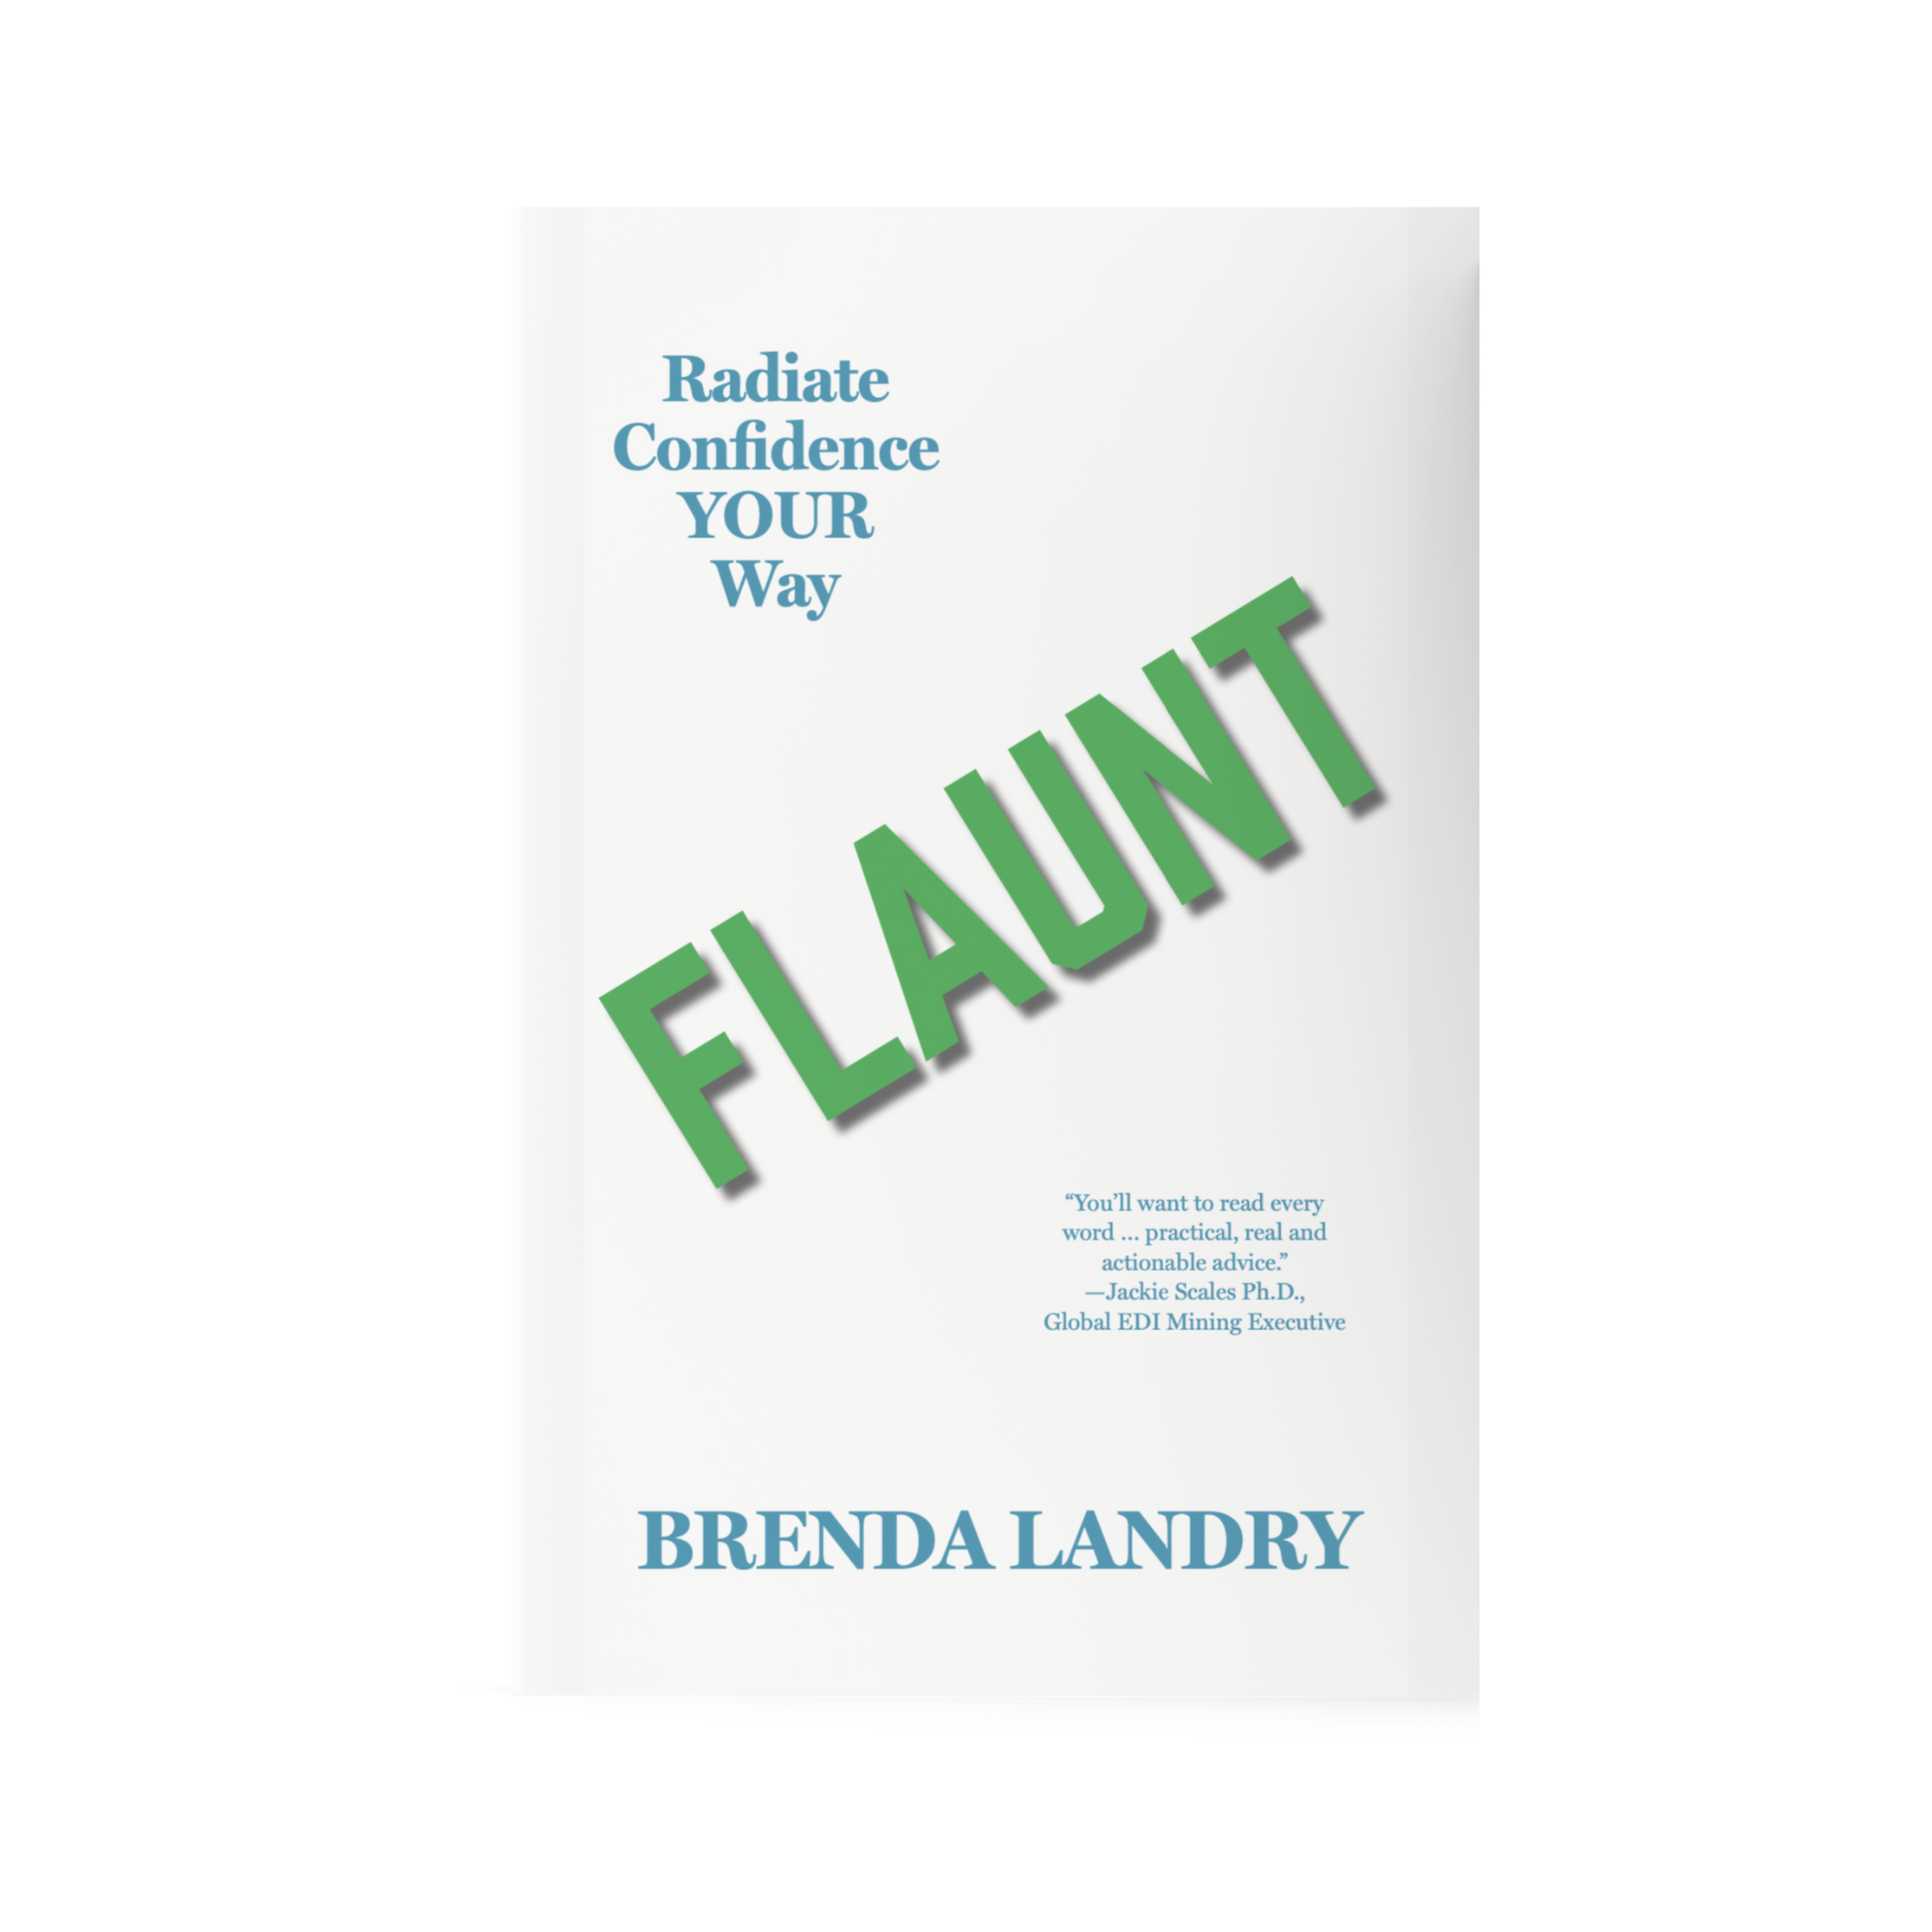 Flaunt: "Radiate Confidence Your Way" Book